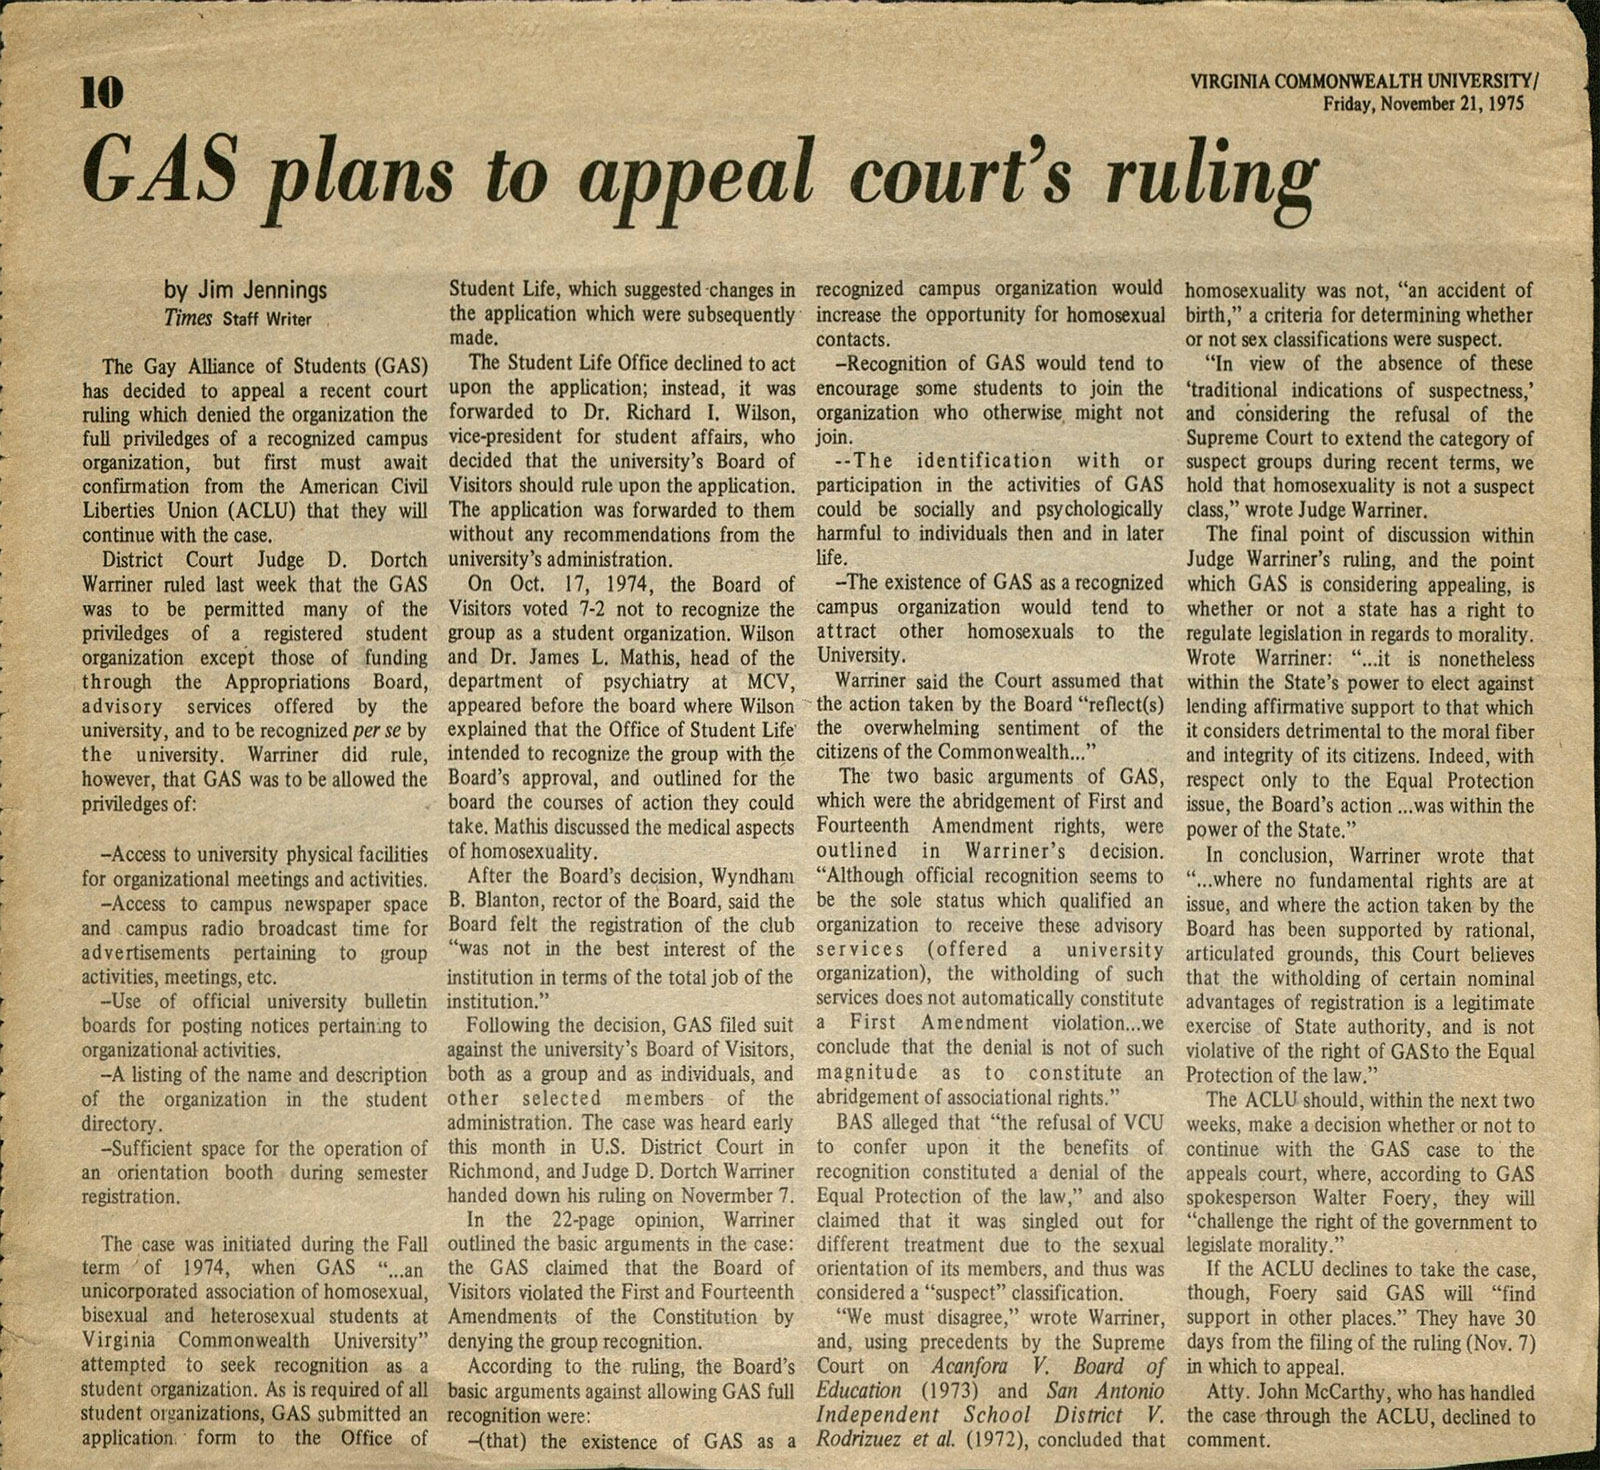 “GAS plans to appeal court’s ruling”
<br>The Commonwealth Times, Nov. 21, 1975
